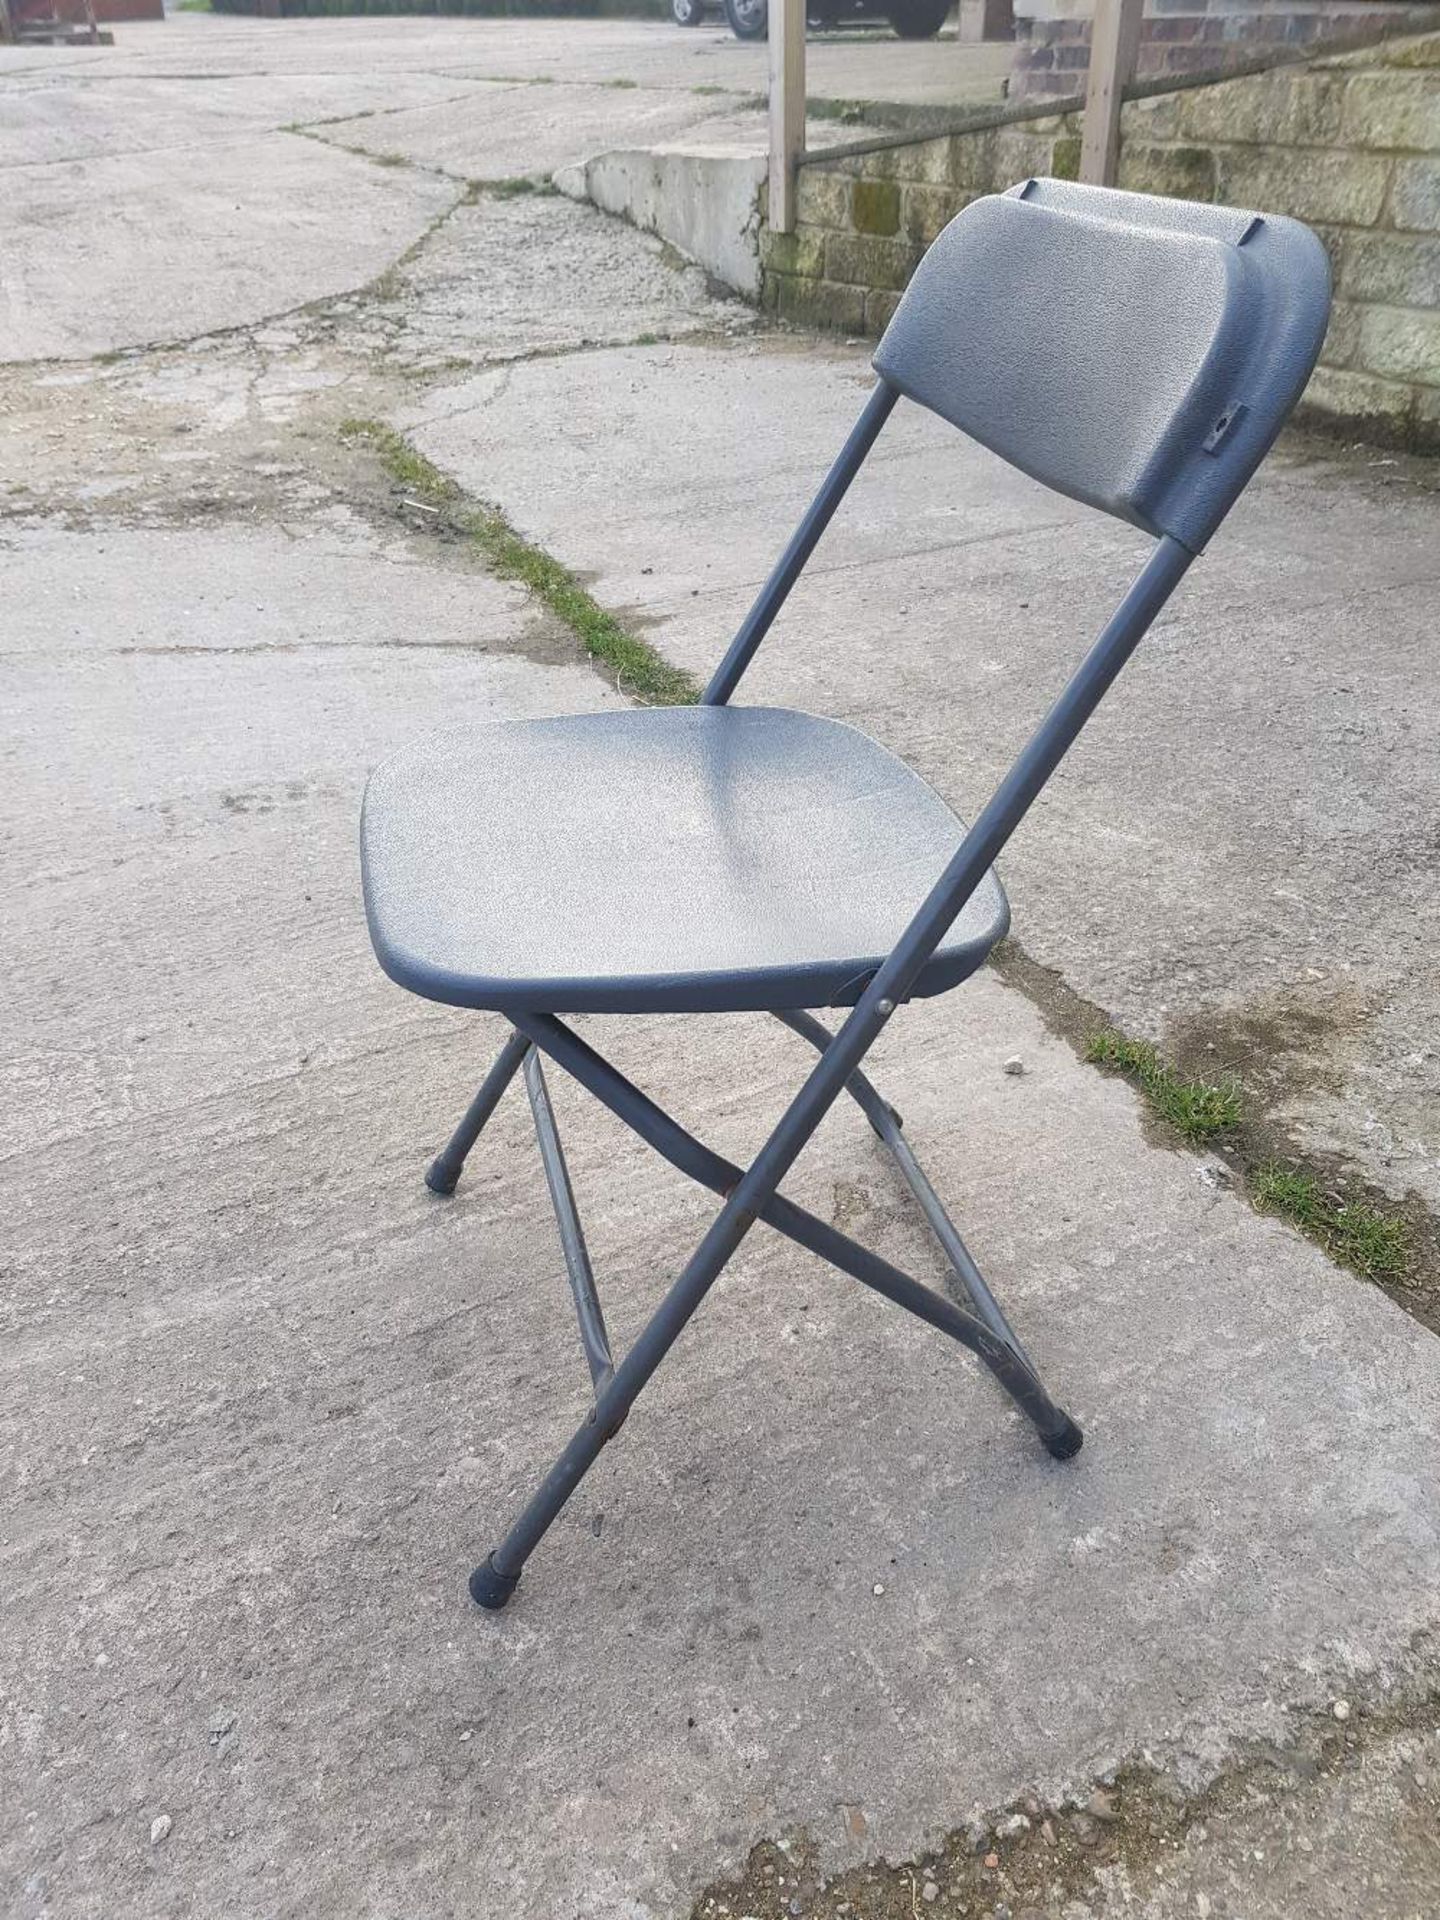 20 x Used Fold Up Banqueting Chairs - Good Condition – NO VAT - Image 2 of 3